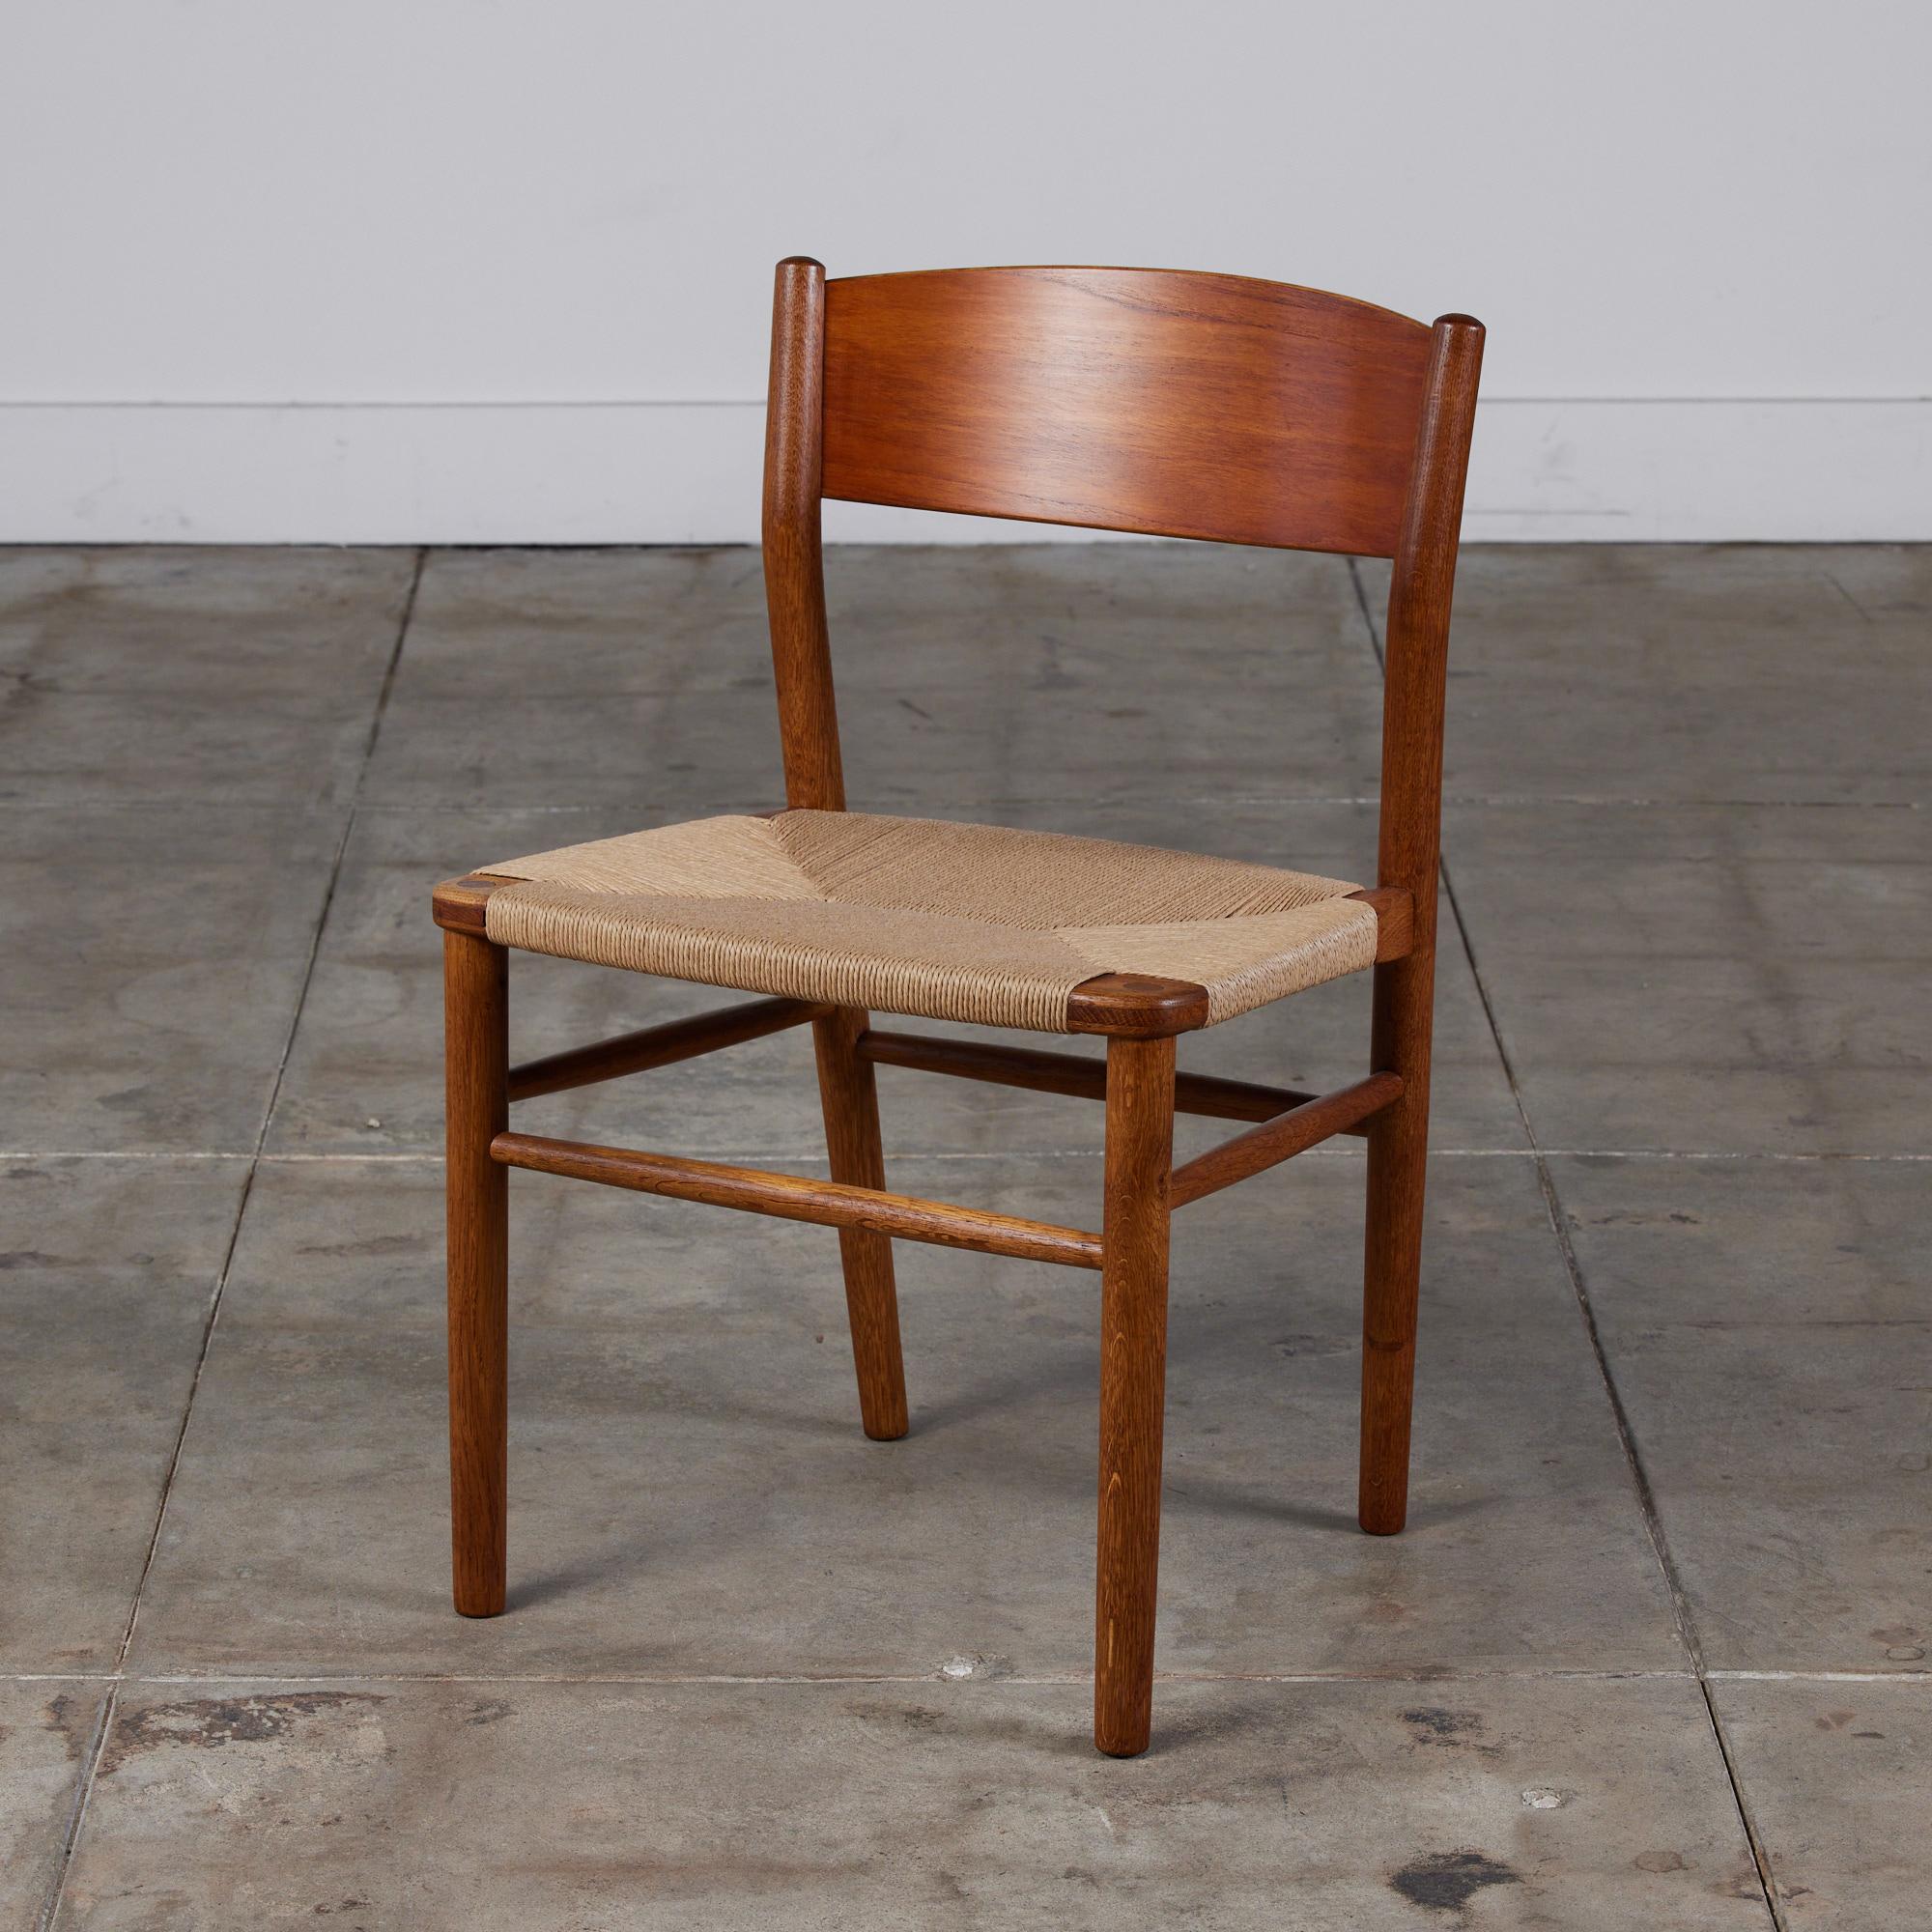 Teak desk or side chair by Børge Mogensen for FDB Møbler beginning in 1947. The chair has a wide, curved backrest and a woven seat in natural Danish paper cord. 

Dimensions: 19.75” width x 19.5” depth x 29.75” height; seat height is 17.75”